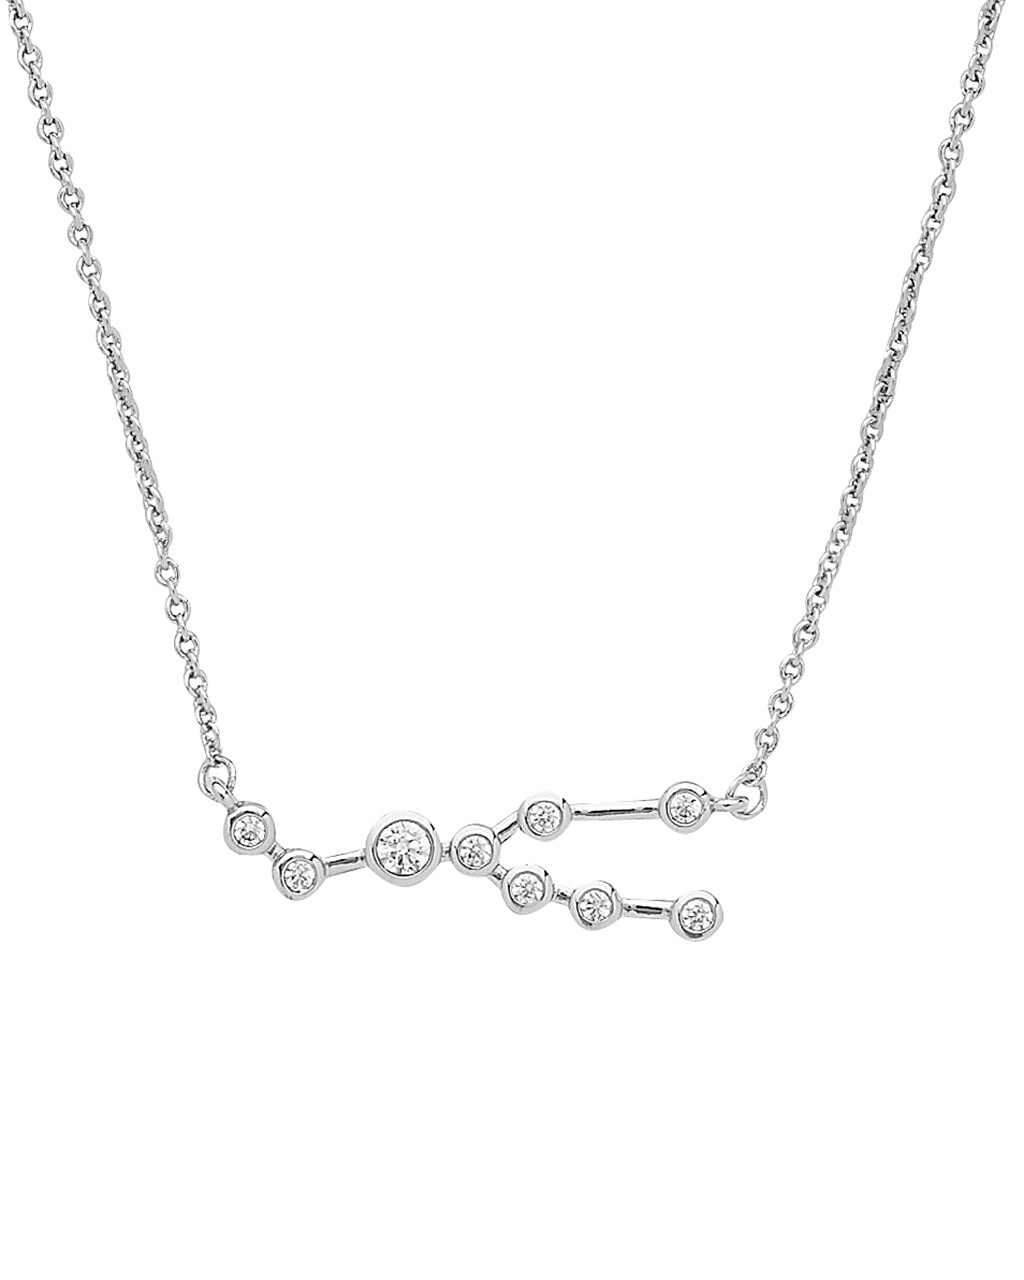 'When Stars Align' Constellation Necklace Necklace Sterling Forever Silver Taurus (Apr 20 - May 20) 